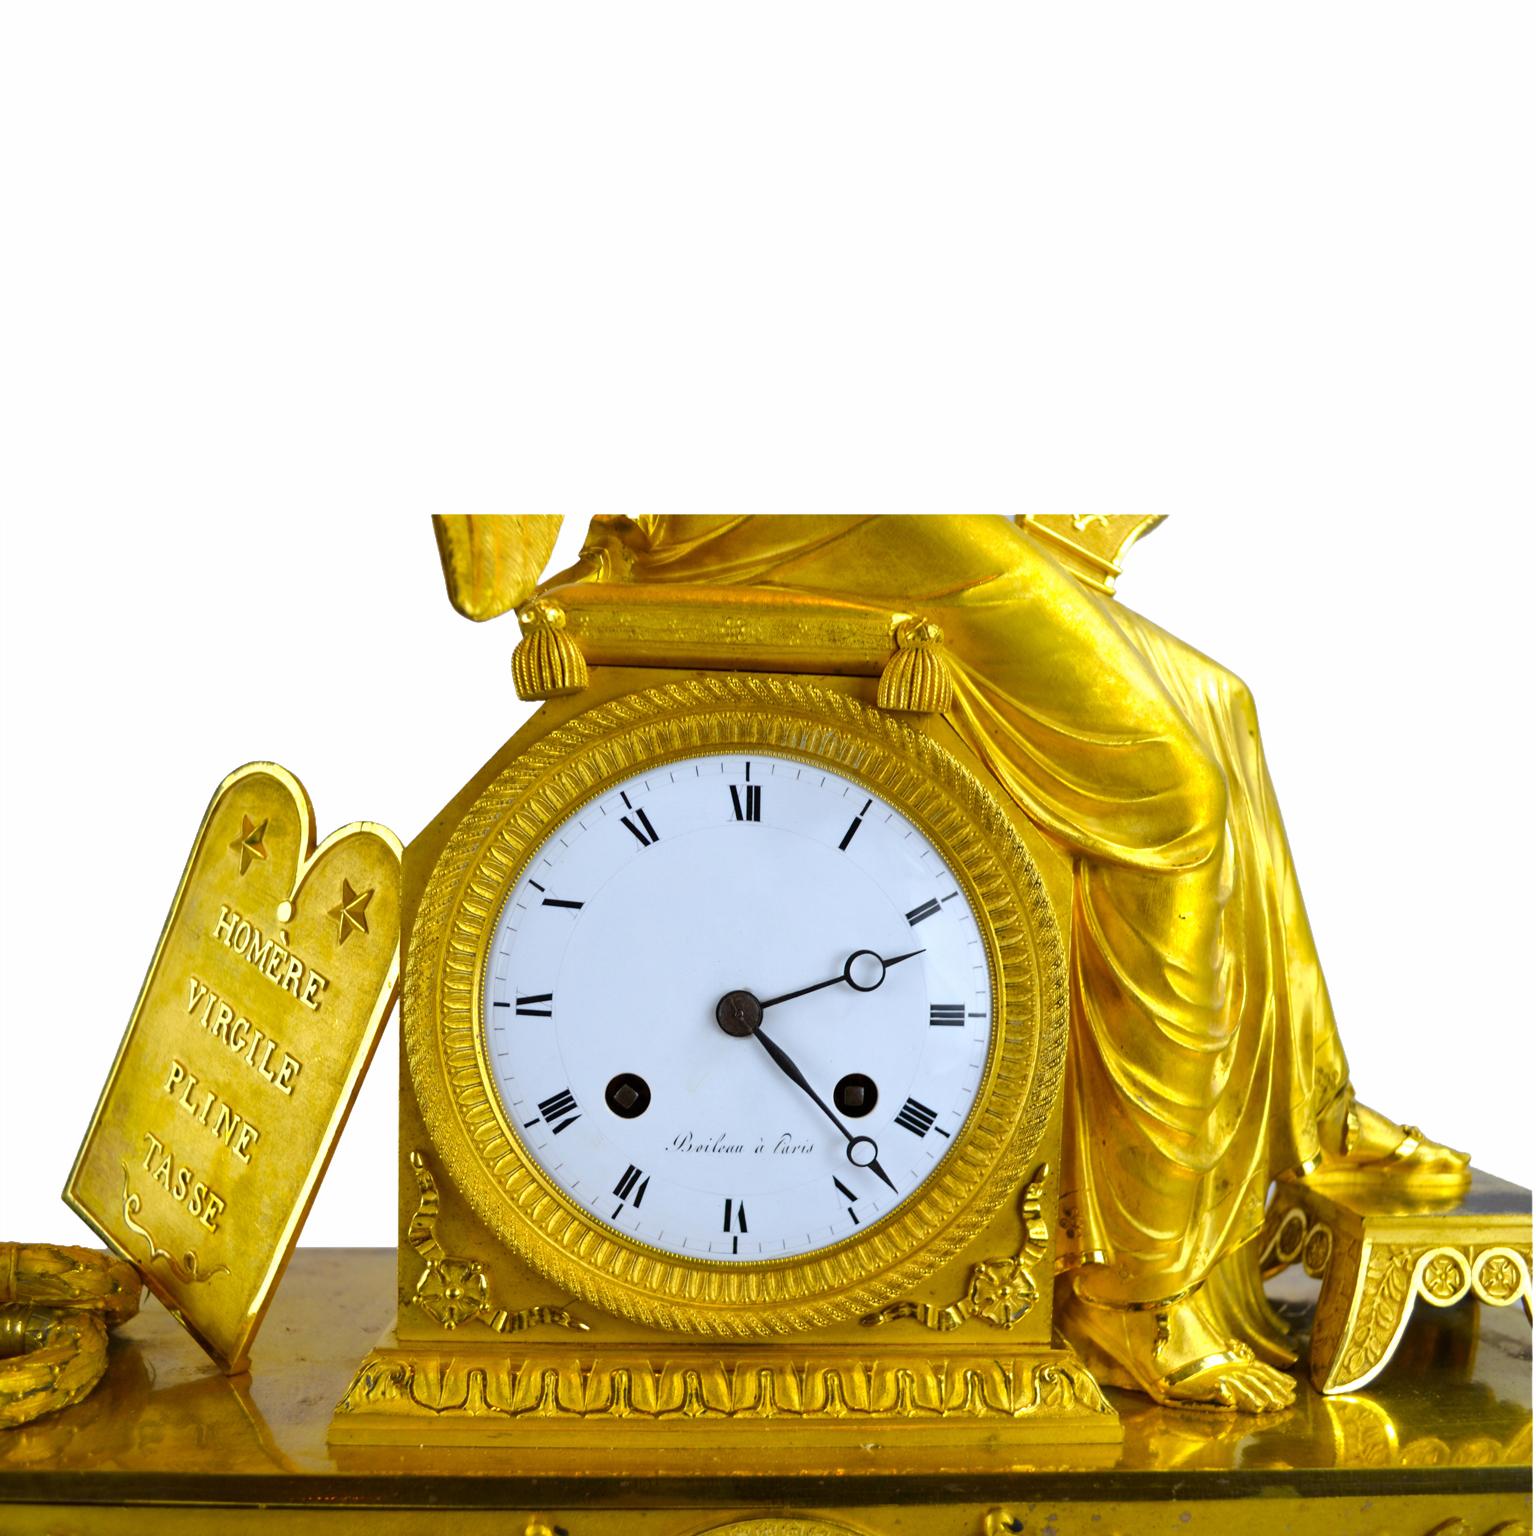 French Empire Clock Depicting Clio the Muse of History and Music